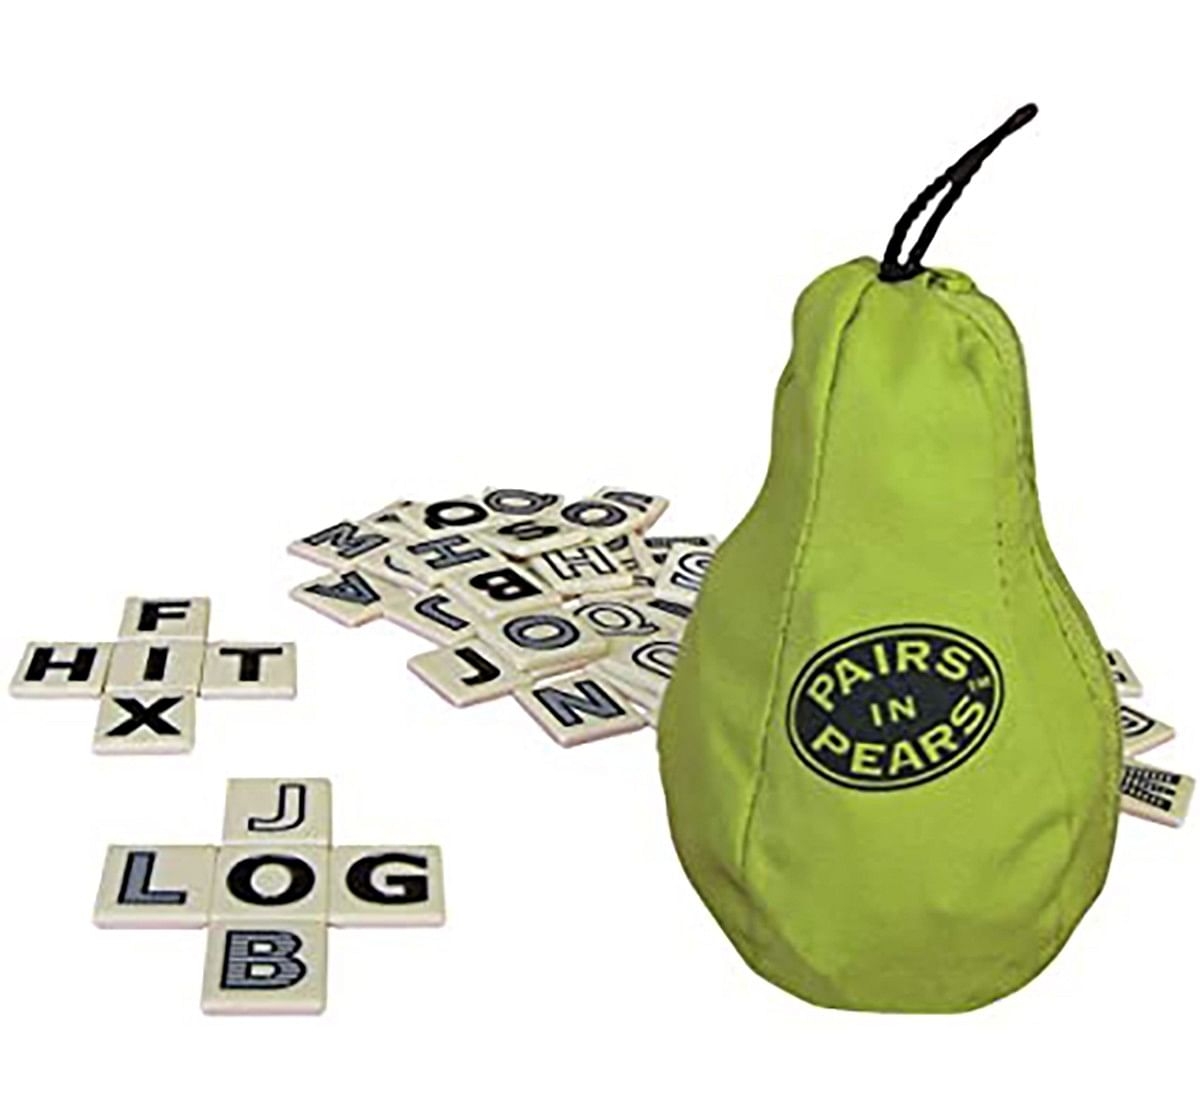 Bananagrams Pairs in Pears Word Game for Kids age 6Y+